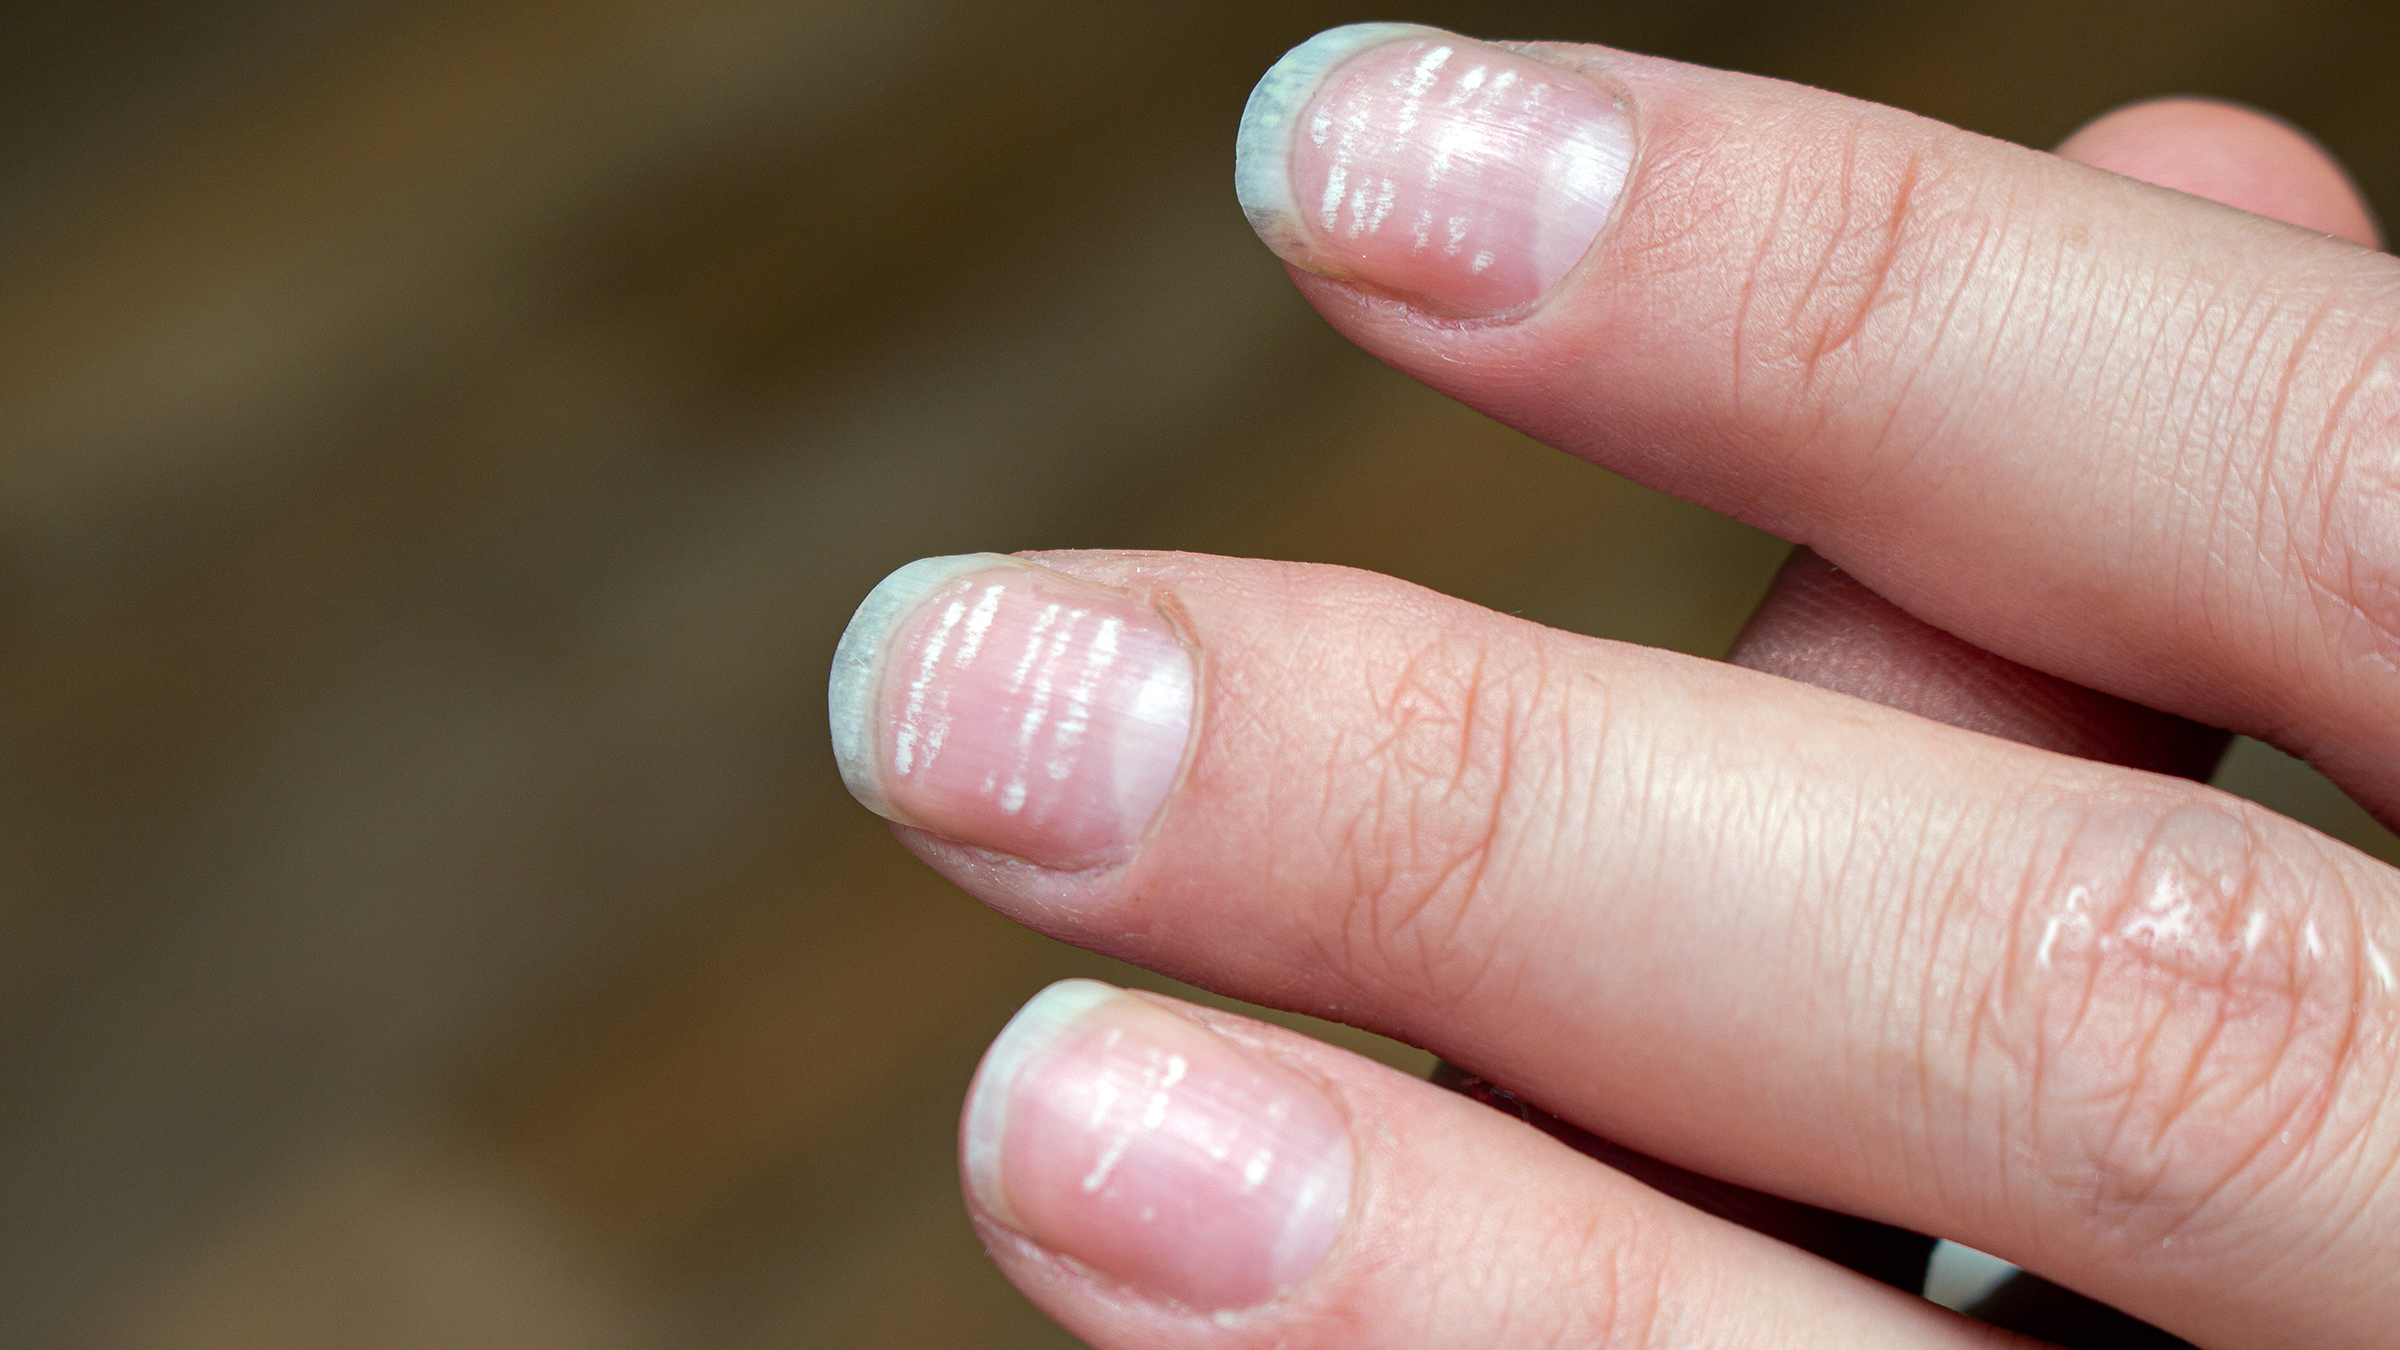 When Should I See a Doctor for Changes in My Nails? - GoodRx